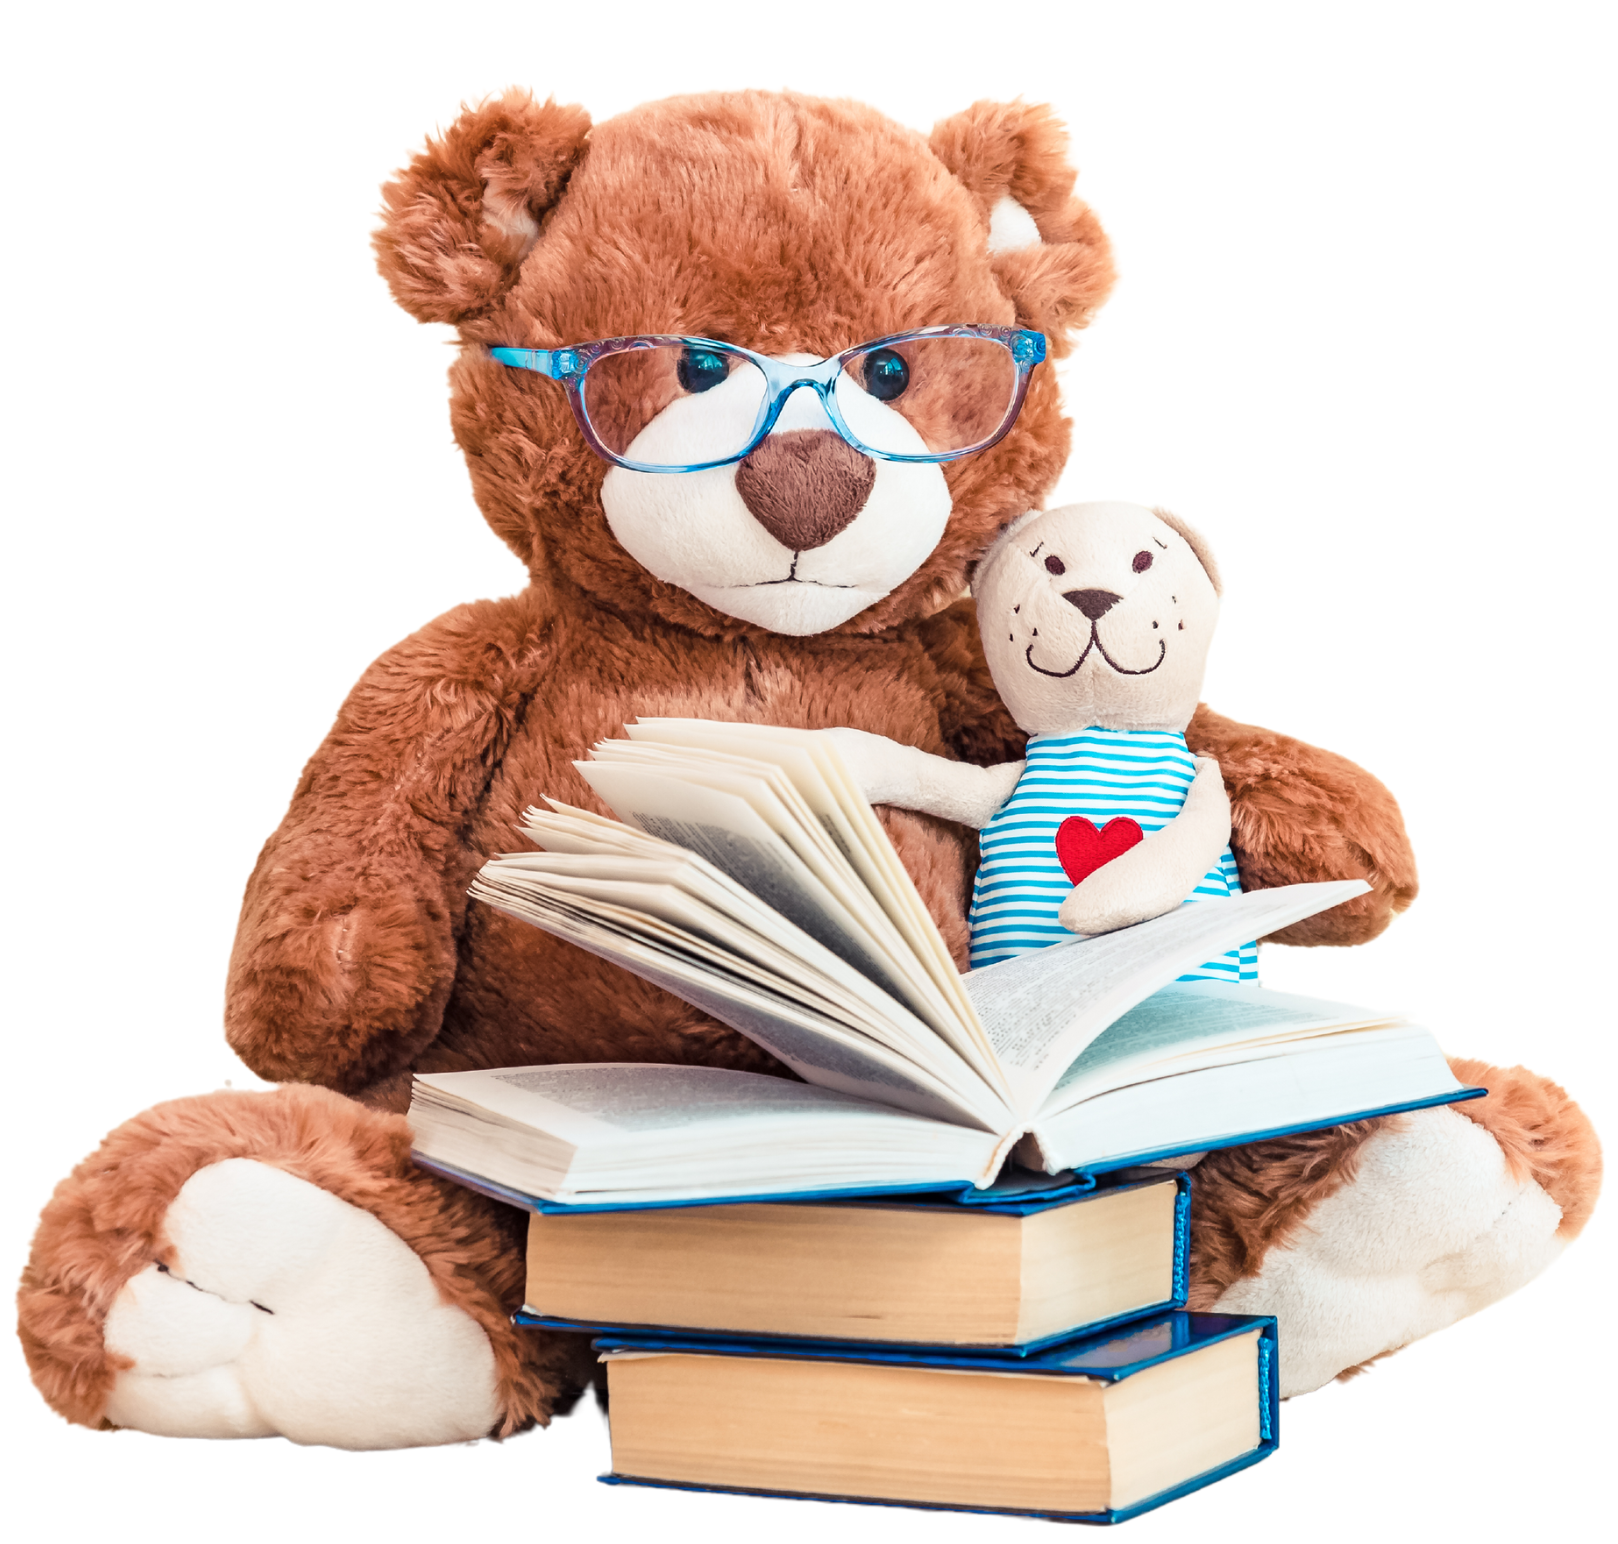 Teddy bear with glasses reading books